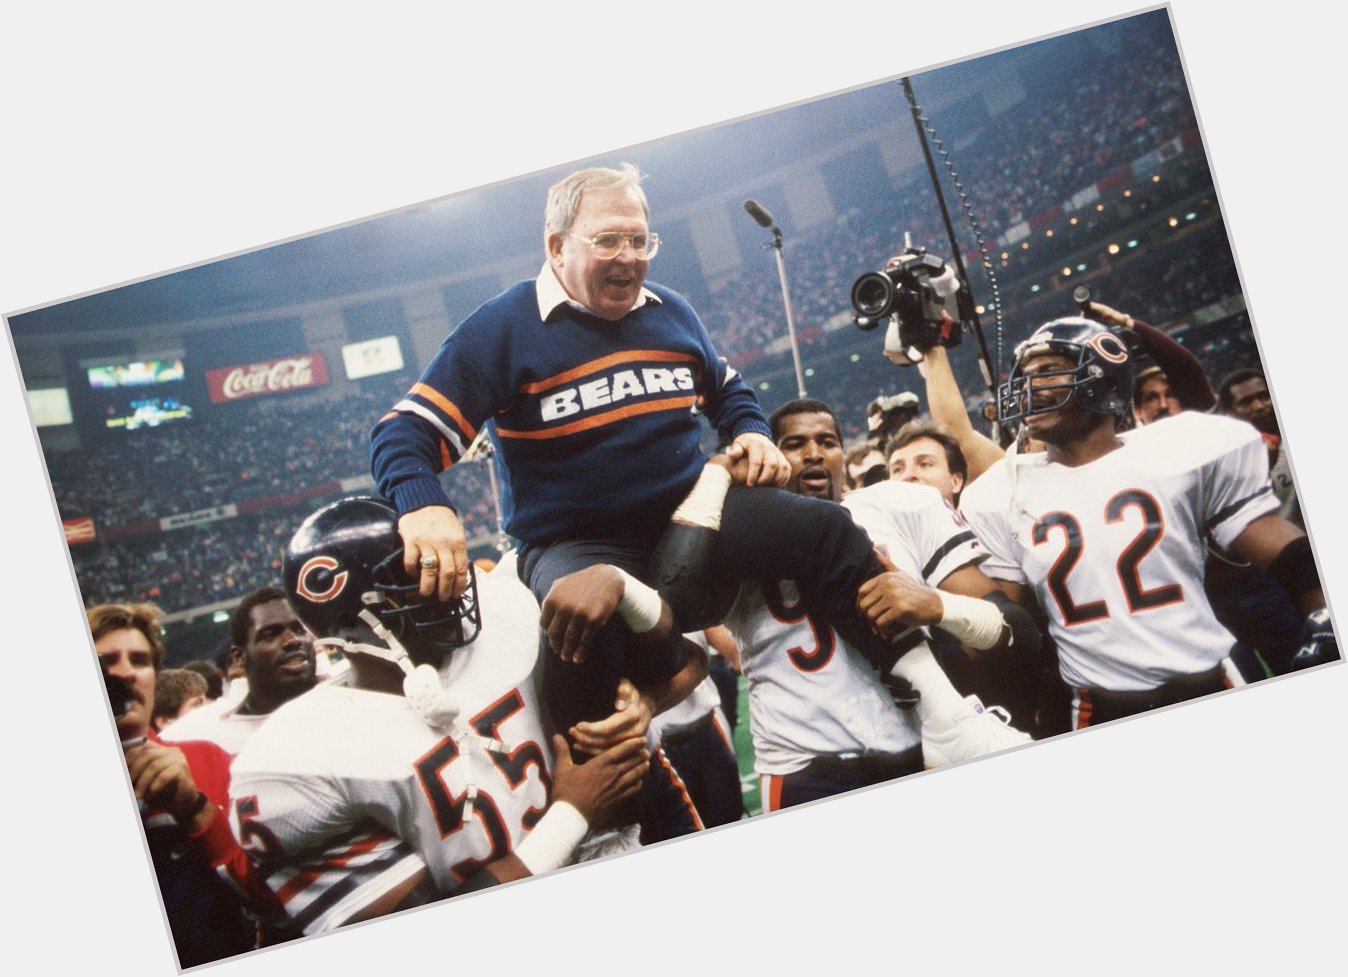 Happy Birthday to Buddy Ryan, who would have turned 86 today! 